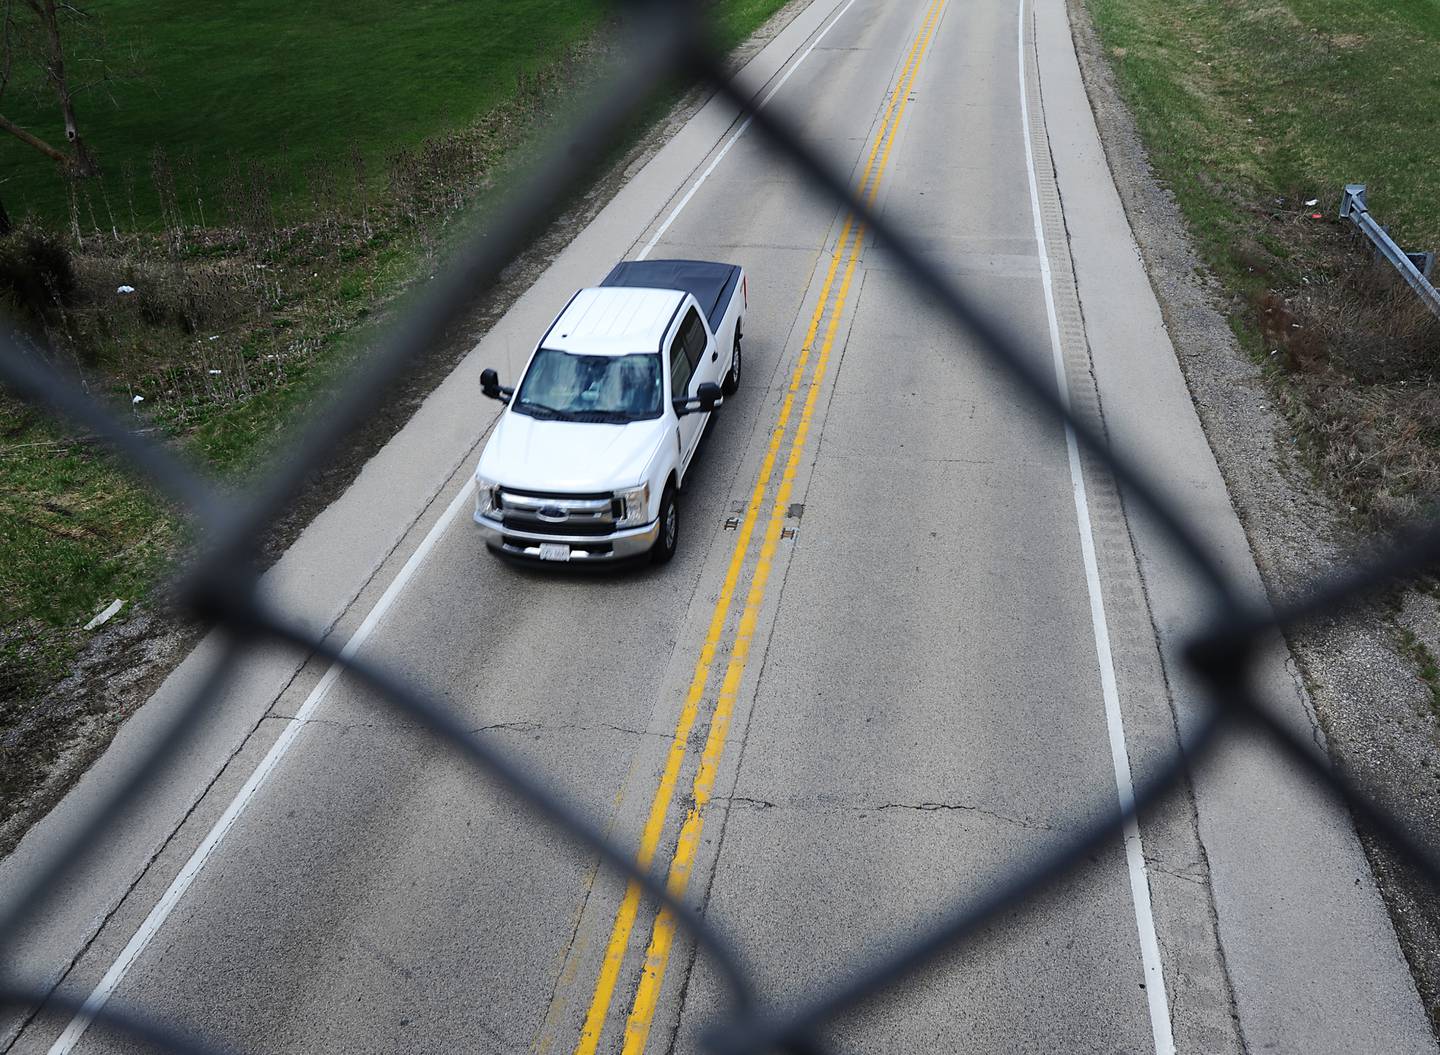 A pickup truck travels U.S. Route 14 on Tuesday, April 26, 2022, near West South Street in Woodstock. The Illinois Department of Transportation is resurfacing a nearly six-mile stretch of U.S. Route 14, running west from Hughes and Hartland roads to IL Route 47. The road is a popular route from Woodstock to Harvard and into Wisconsin.